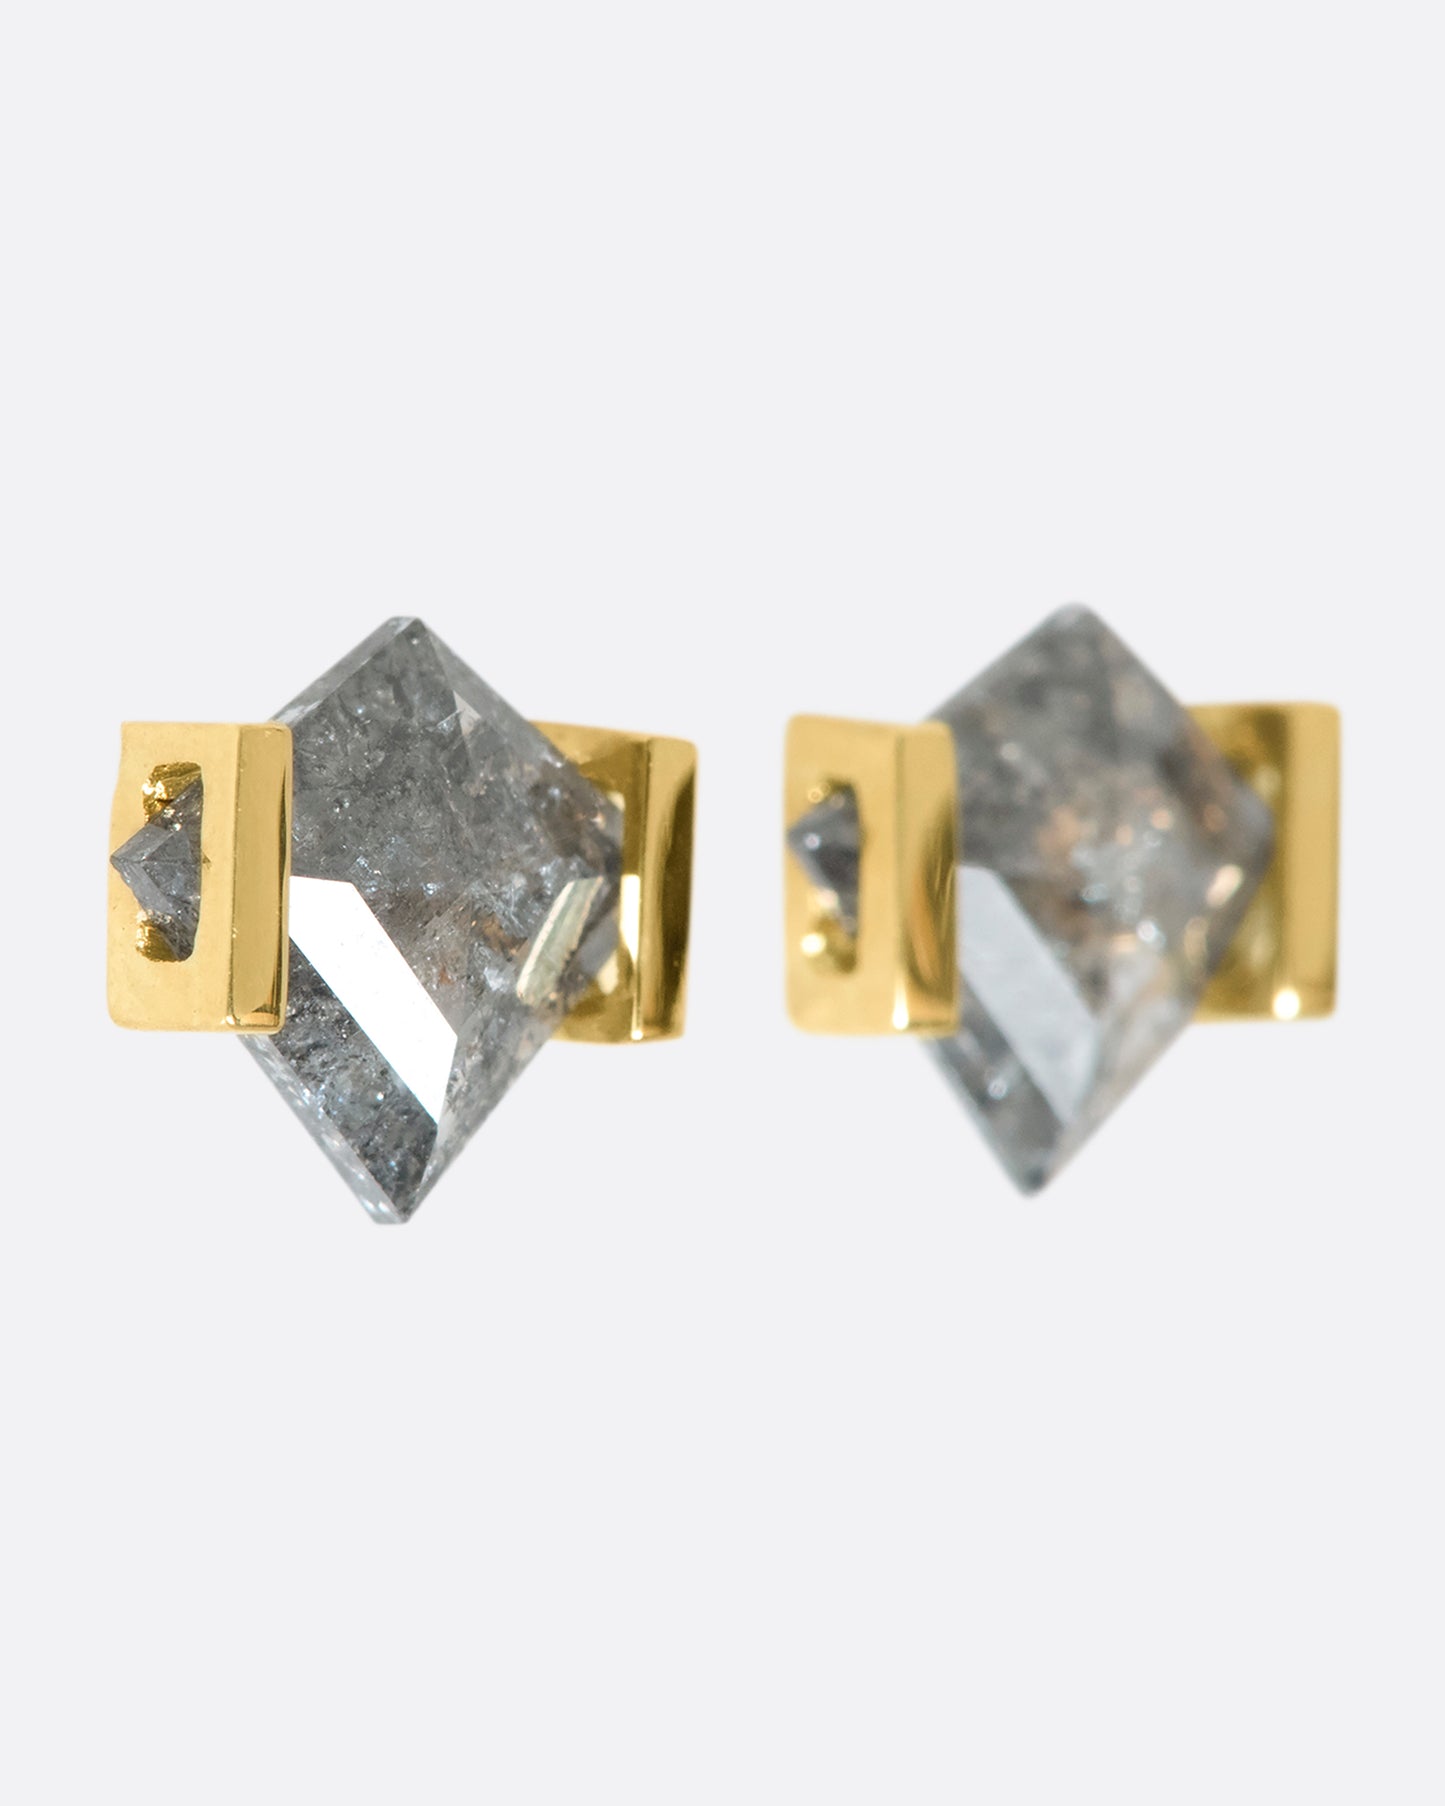 A close up of a pair of kite shaped grey diamonds in delicate gold settings.